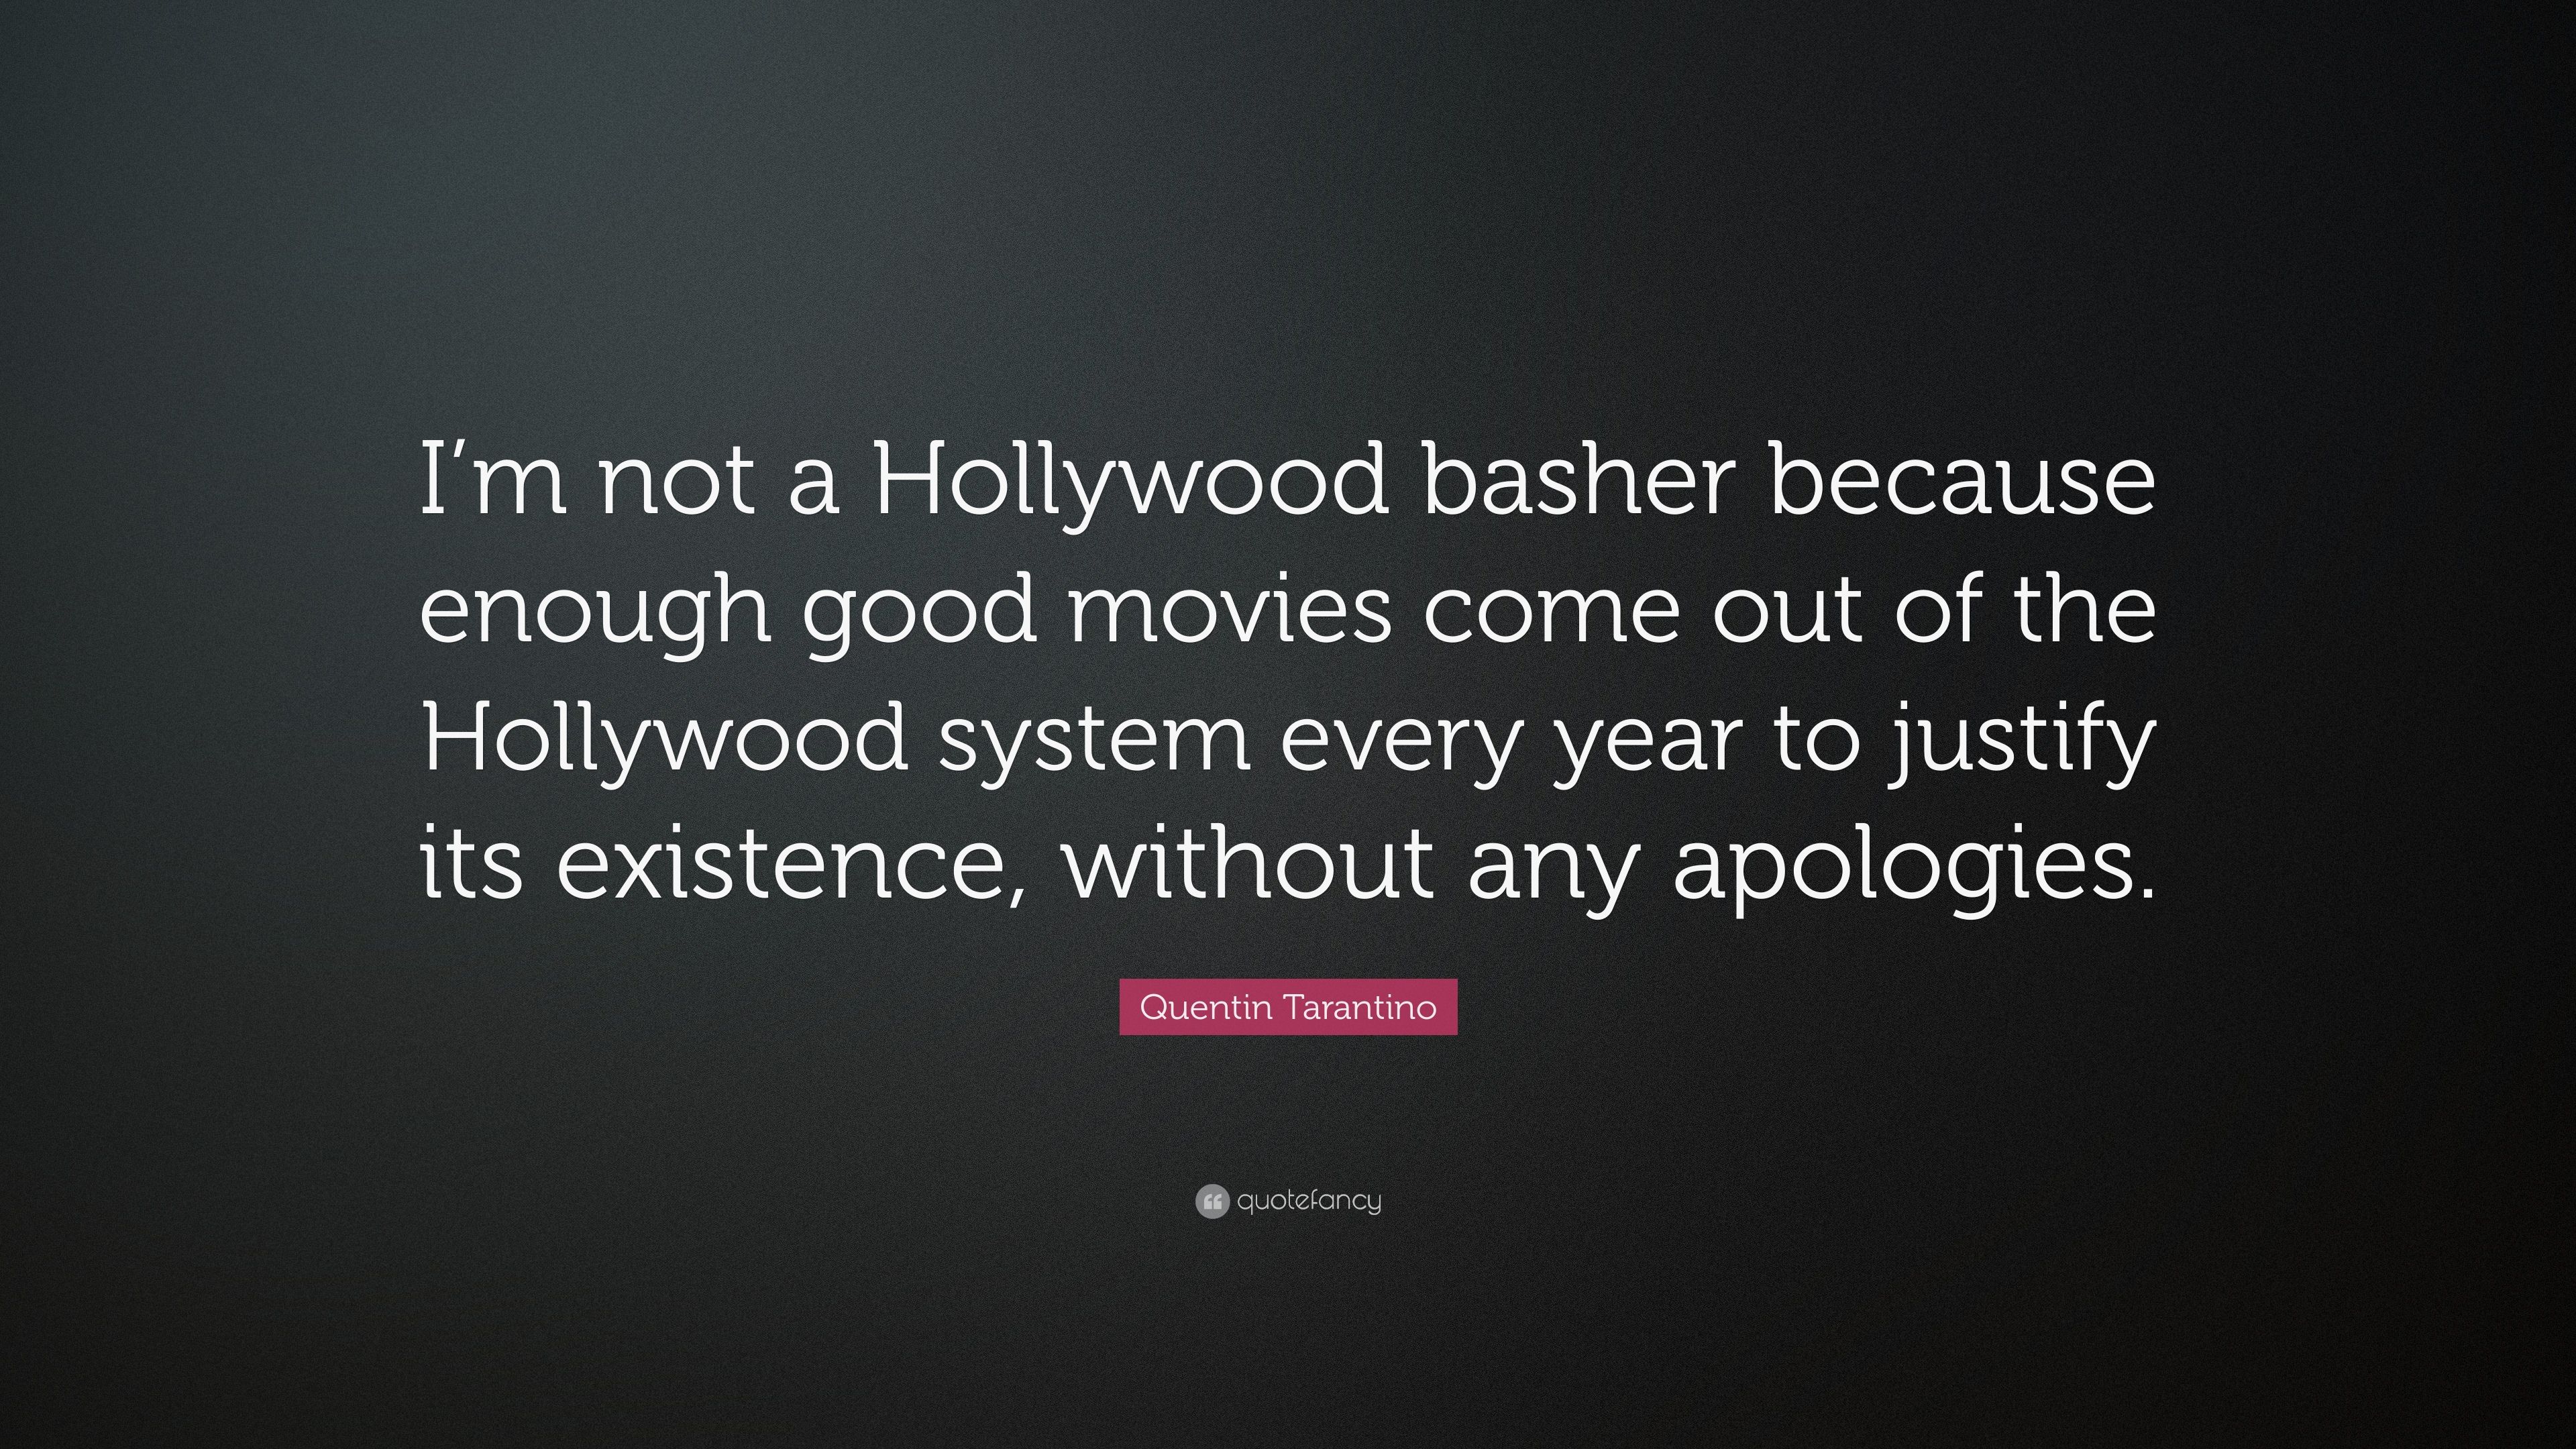 Quentin Tarantino Quote: “I'm not a Hollywood basher because